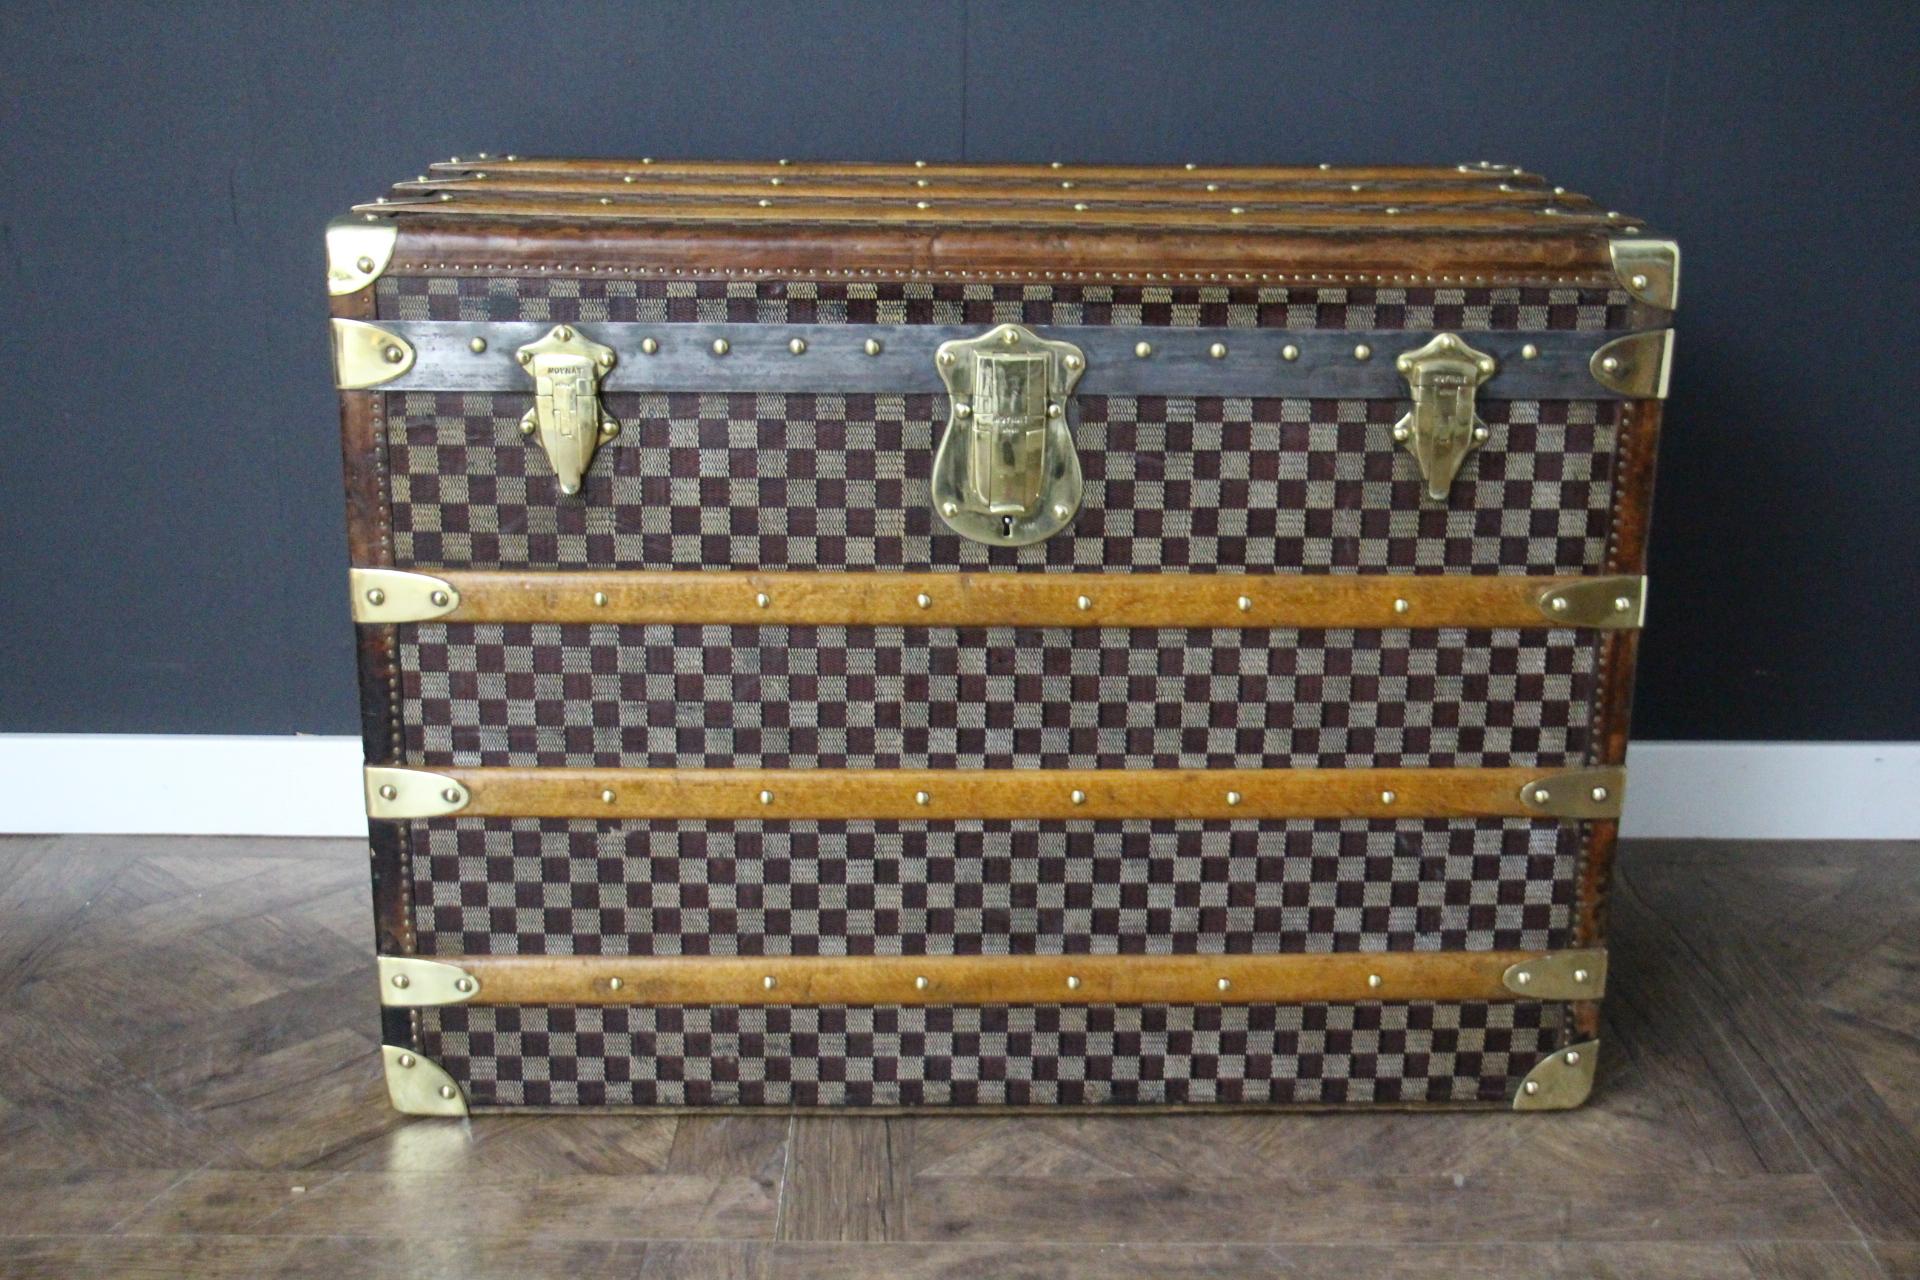 This magnificent Moynat shoe trunk features checkers canvas, top quality Moynat stamped solid brass locks, brass studs and leather side handles. Its handles' flanges are engraved Moynat Paris.This Moynat trunk also has got a magnificent chocolate